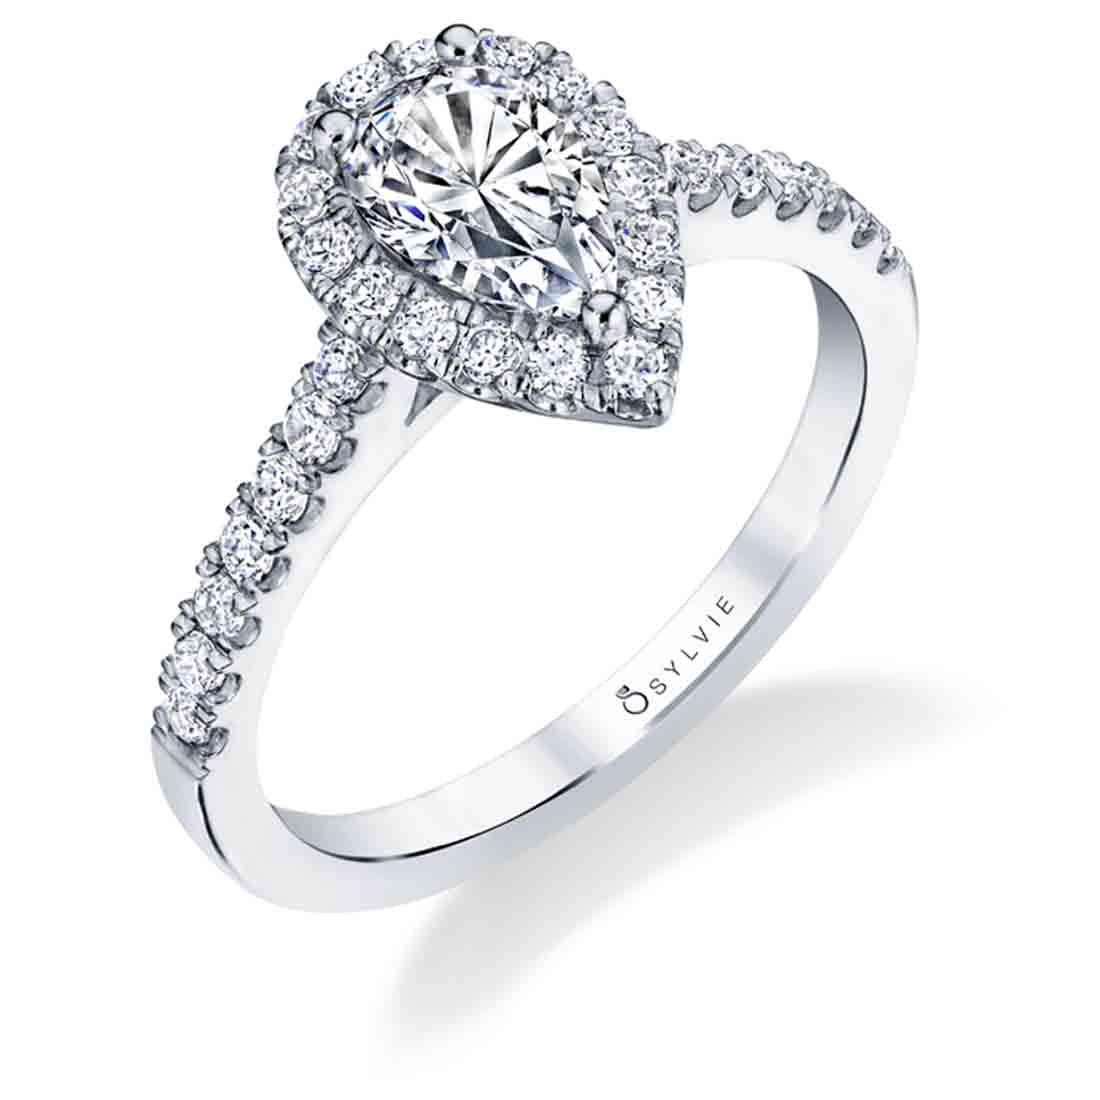 Classic Engagement Ring with Halo - Emma Stuart Benjamin & Co. Jewelry Designs San Diego, CA